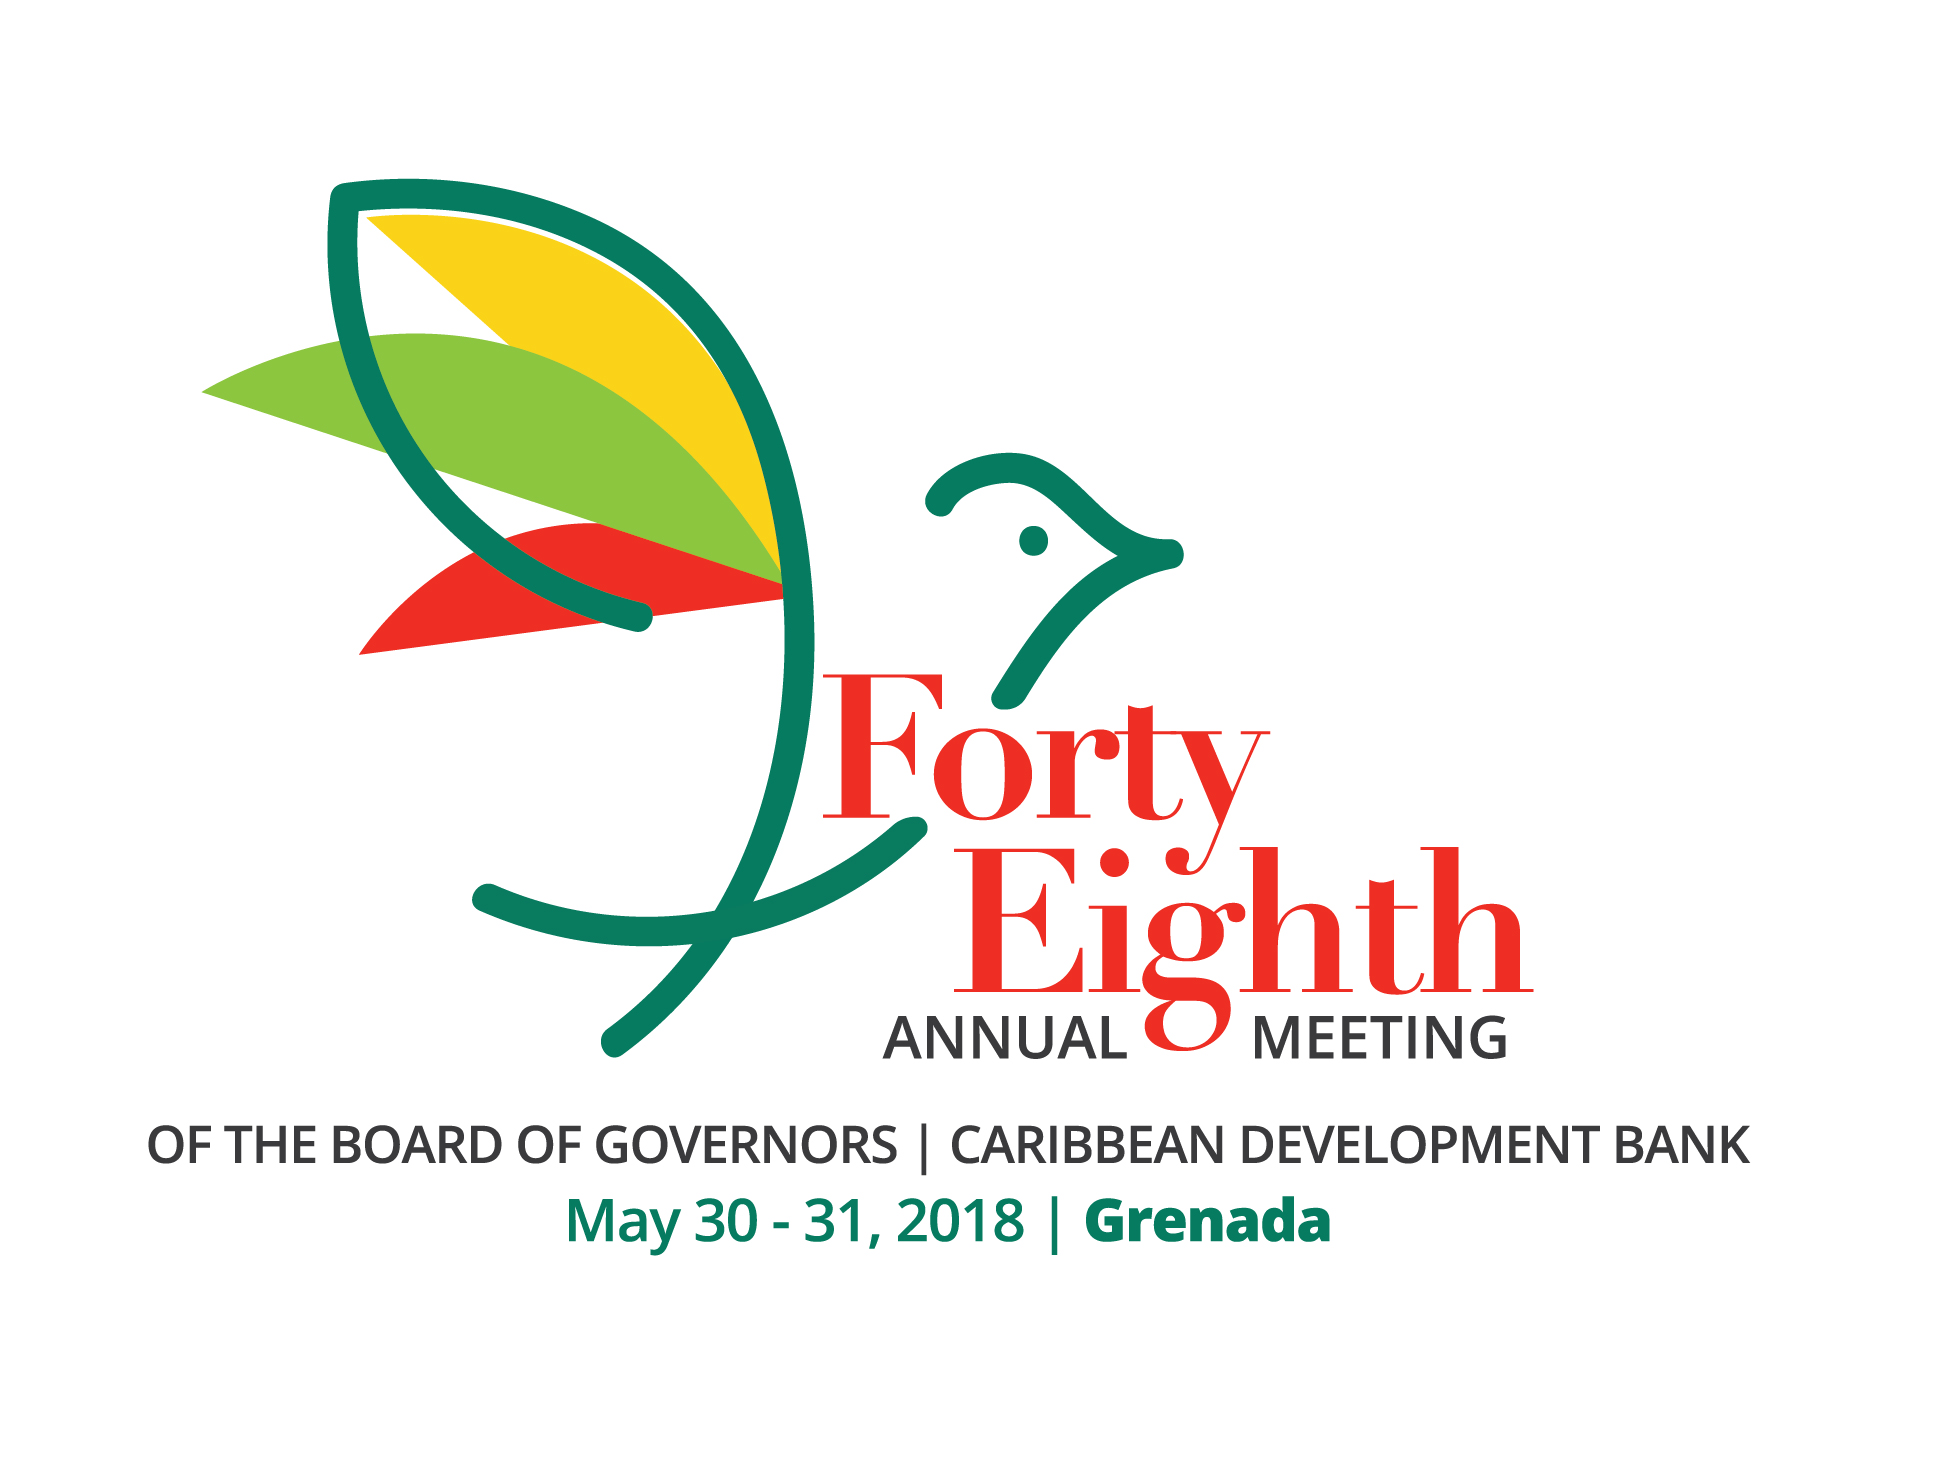 CDB unveils logo for the 48th Annual Meeting of its Board of Governors